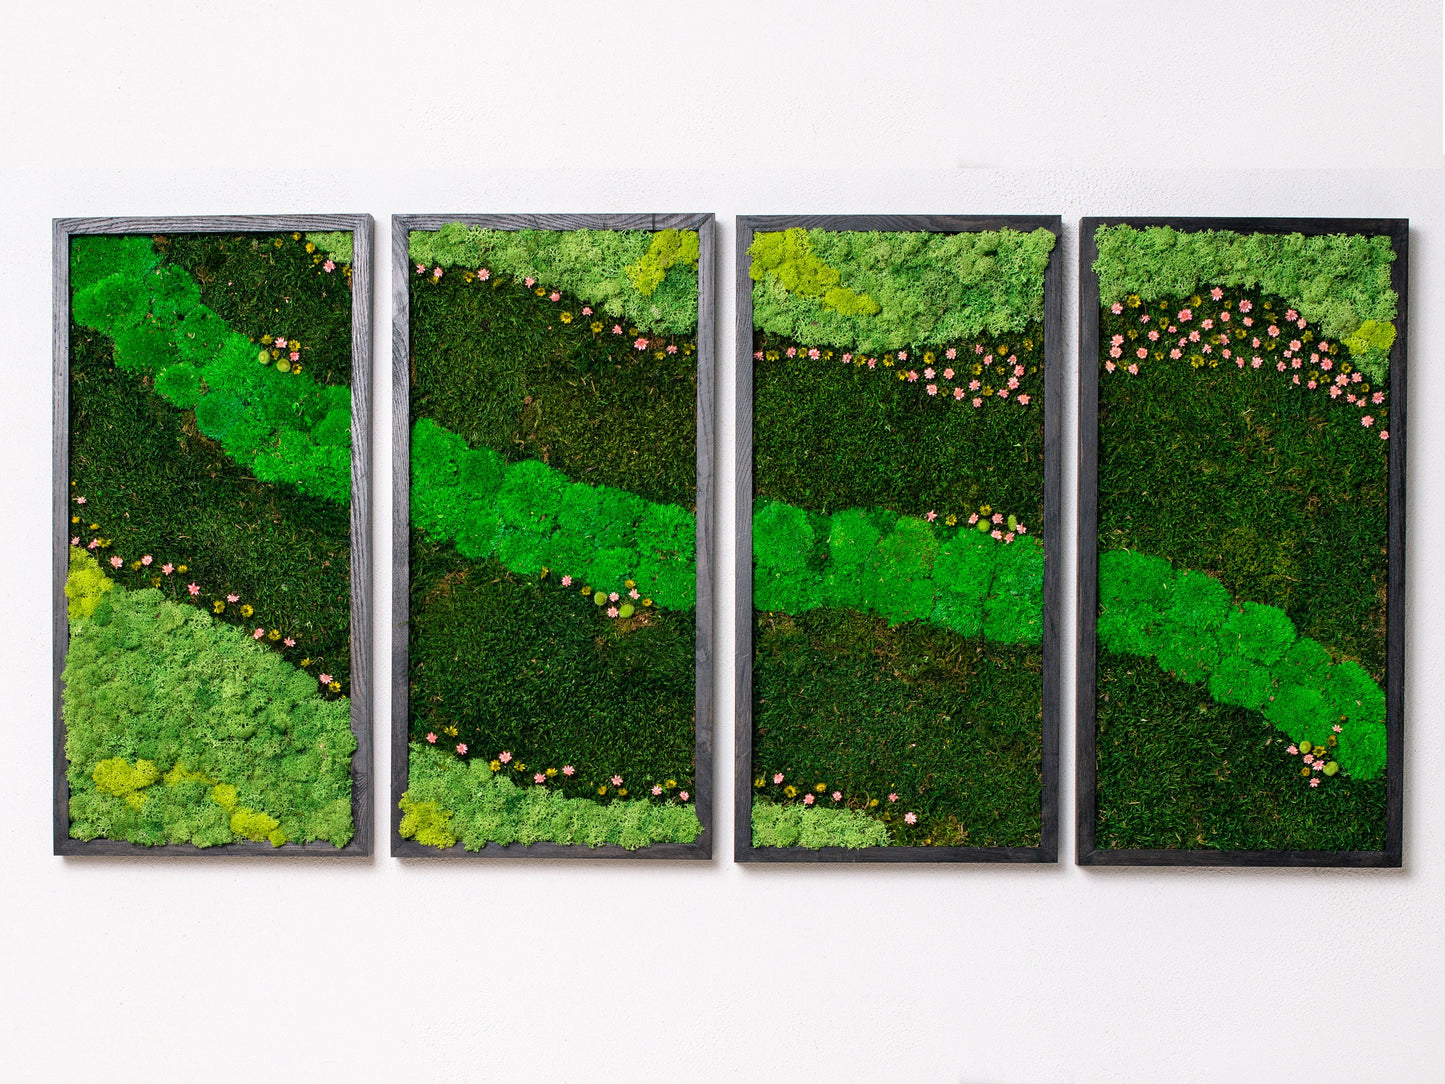 Enliven Your Space: Eco-Friendly Squares Moss Wall Art - Perfect Housewarming Gift!